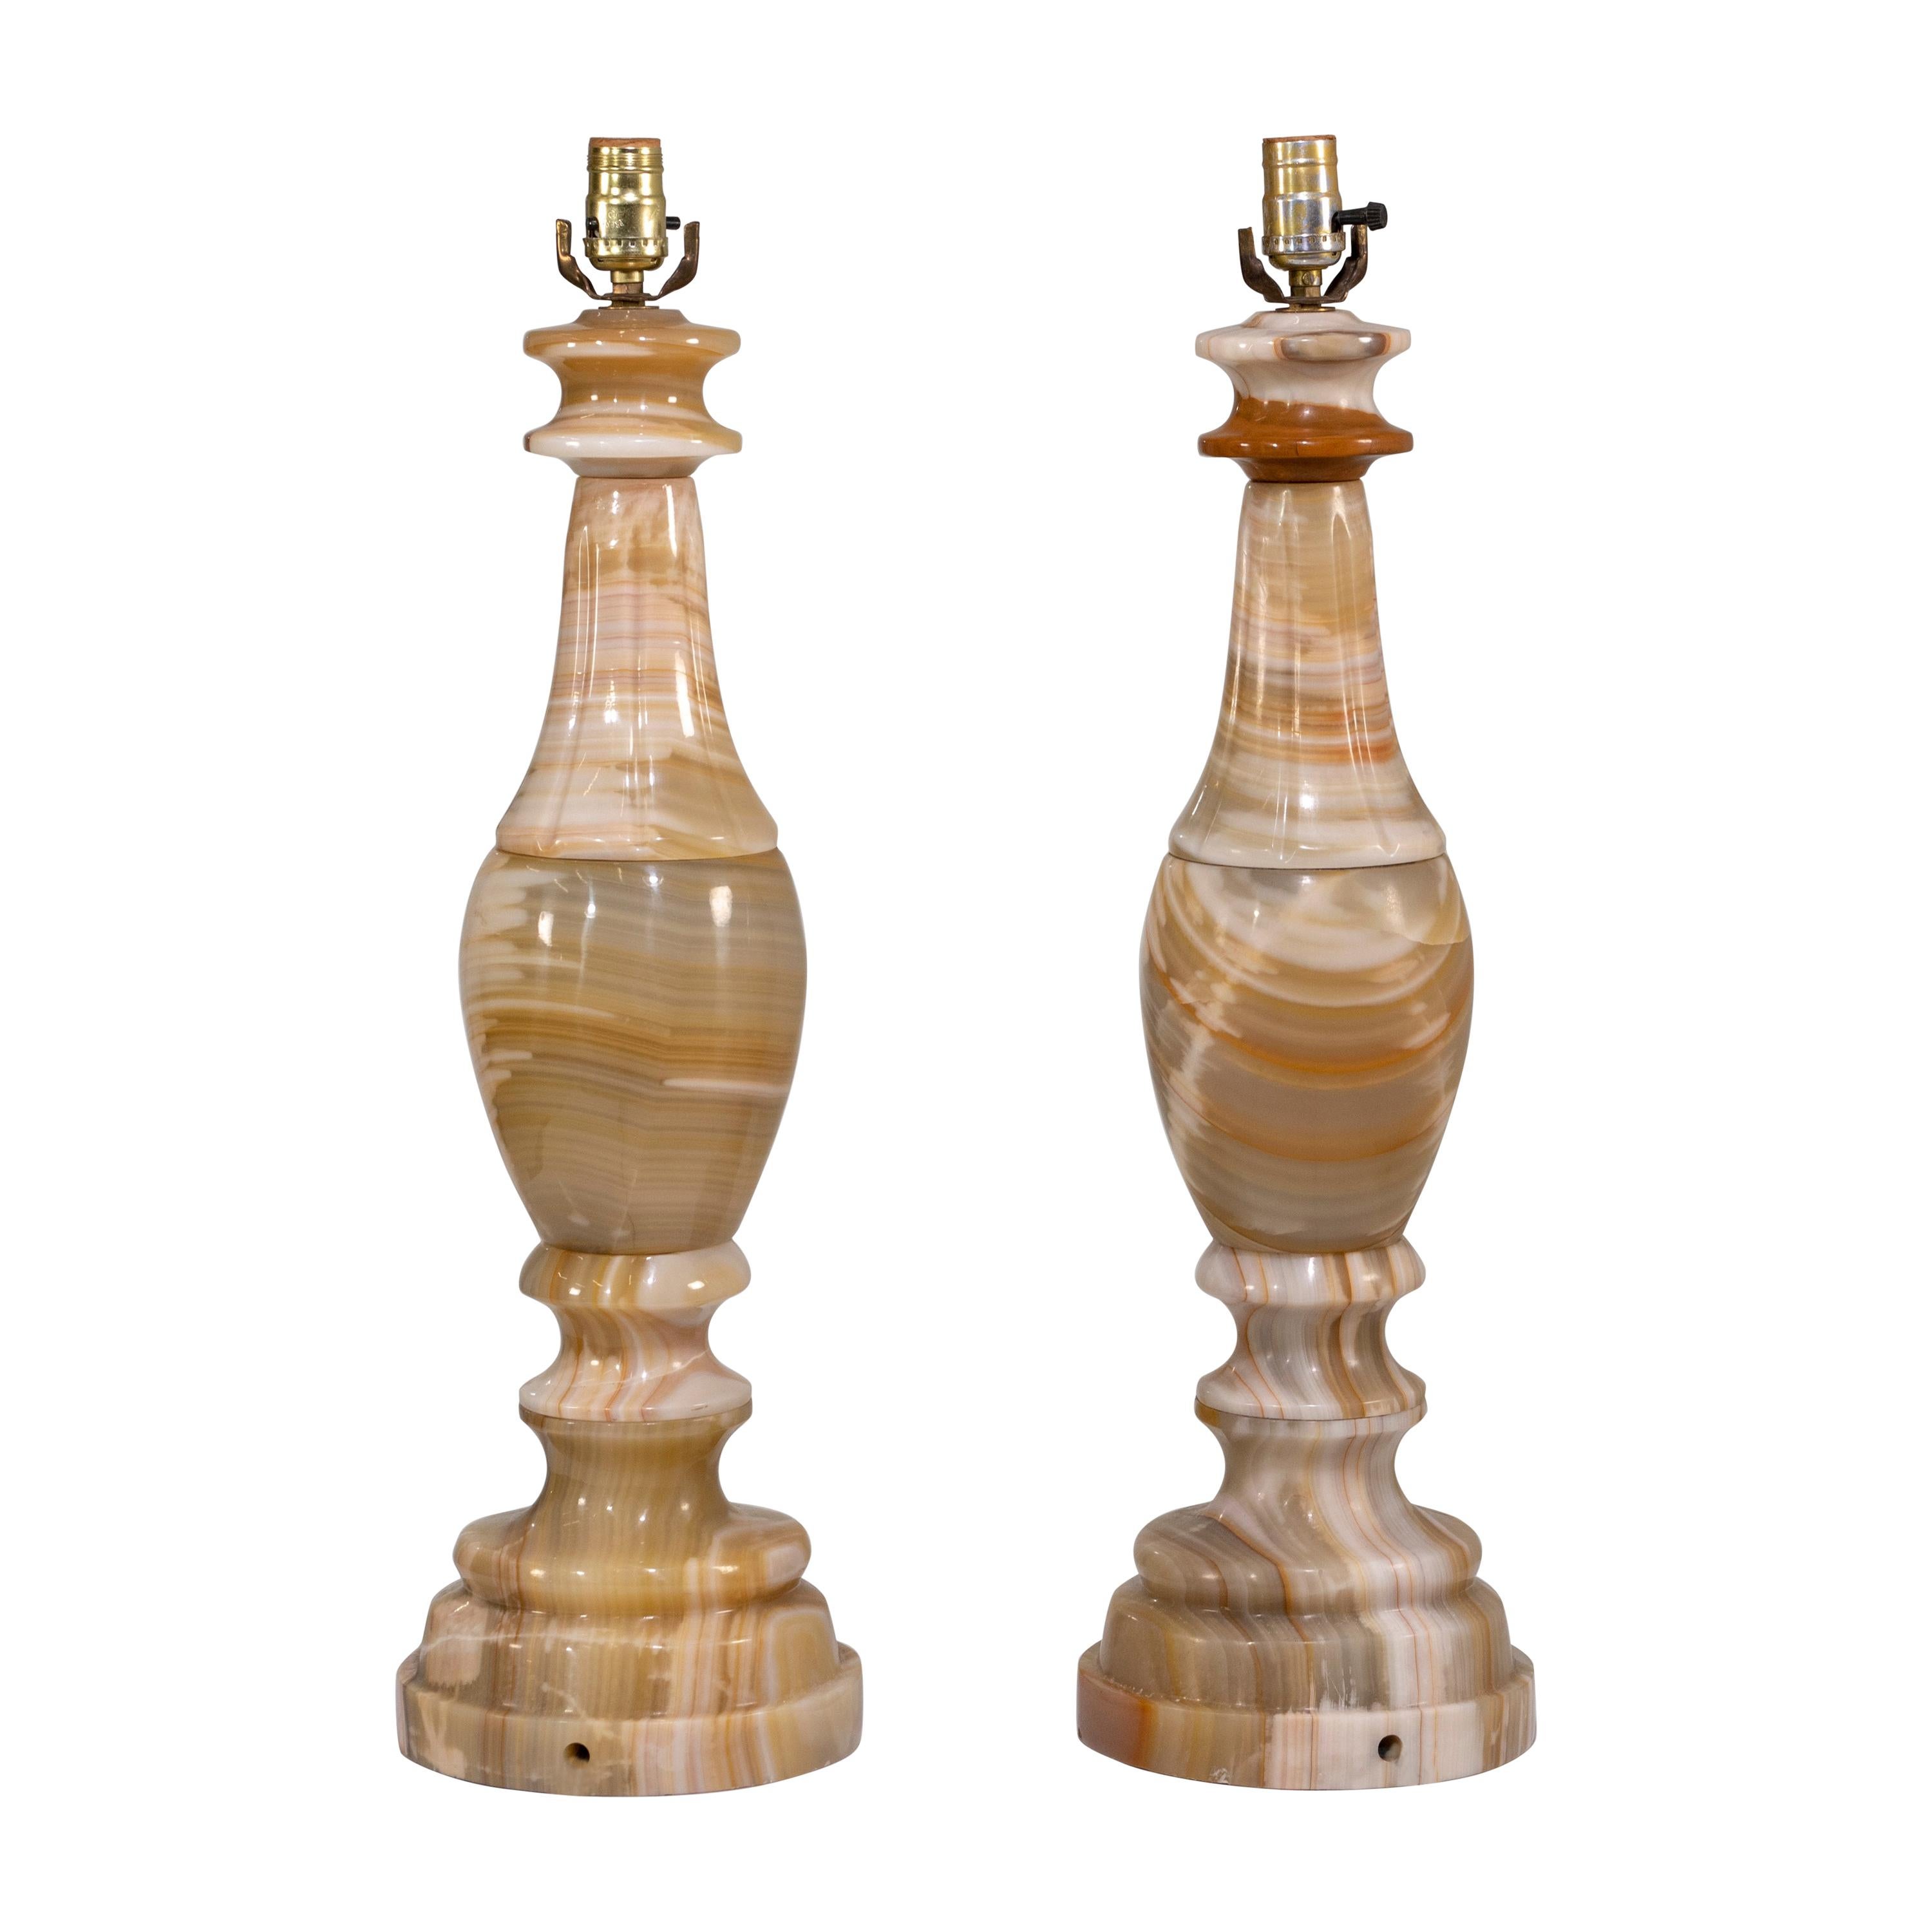 Stunning Pair of Large Scale Neoclassical Onyx Table Lamps